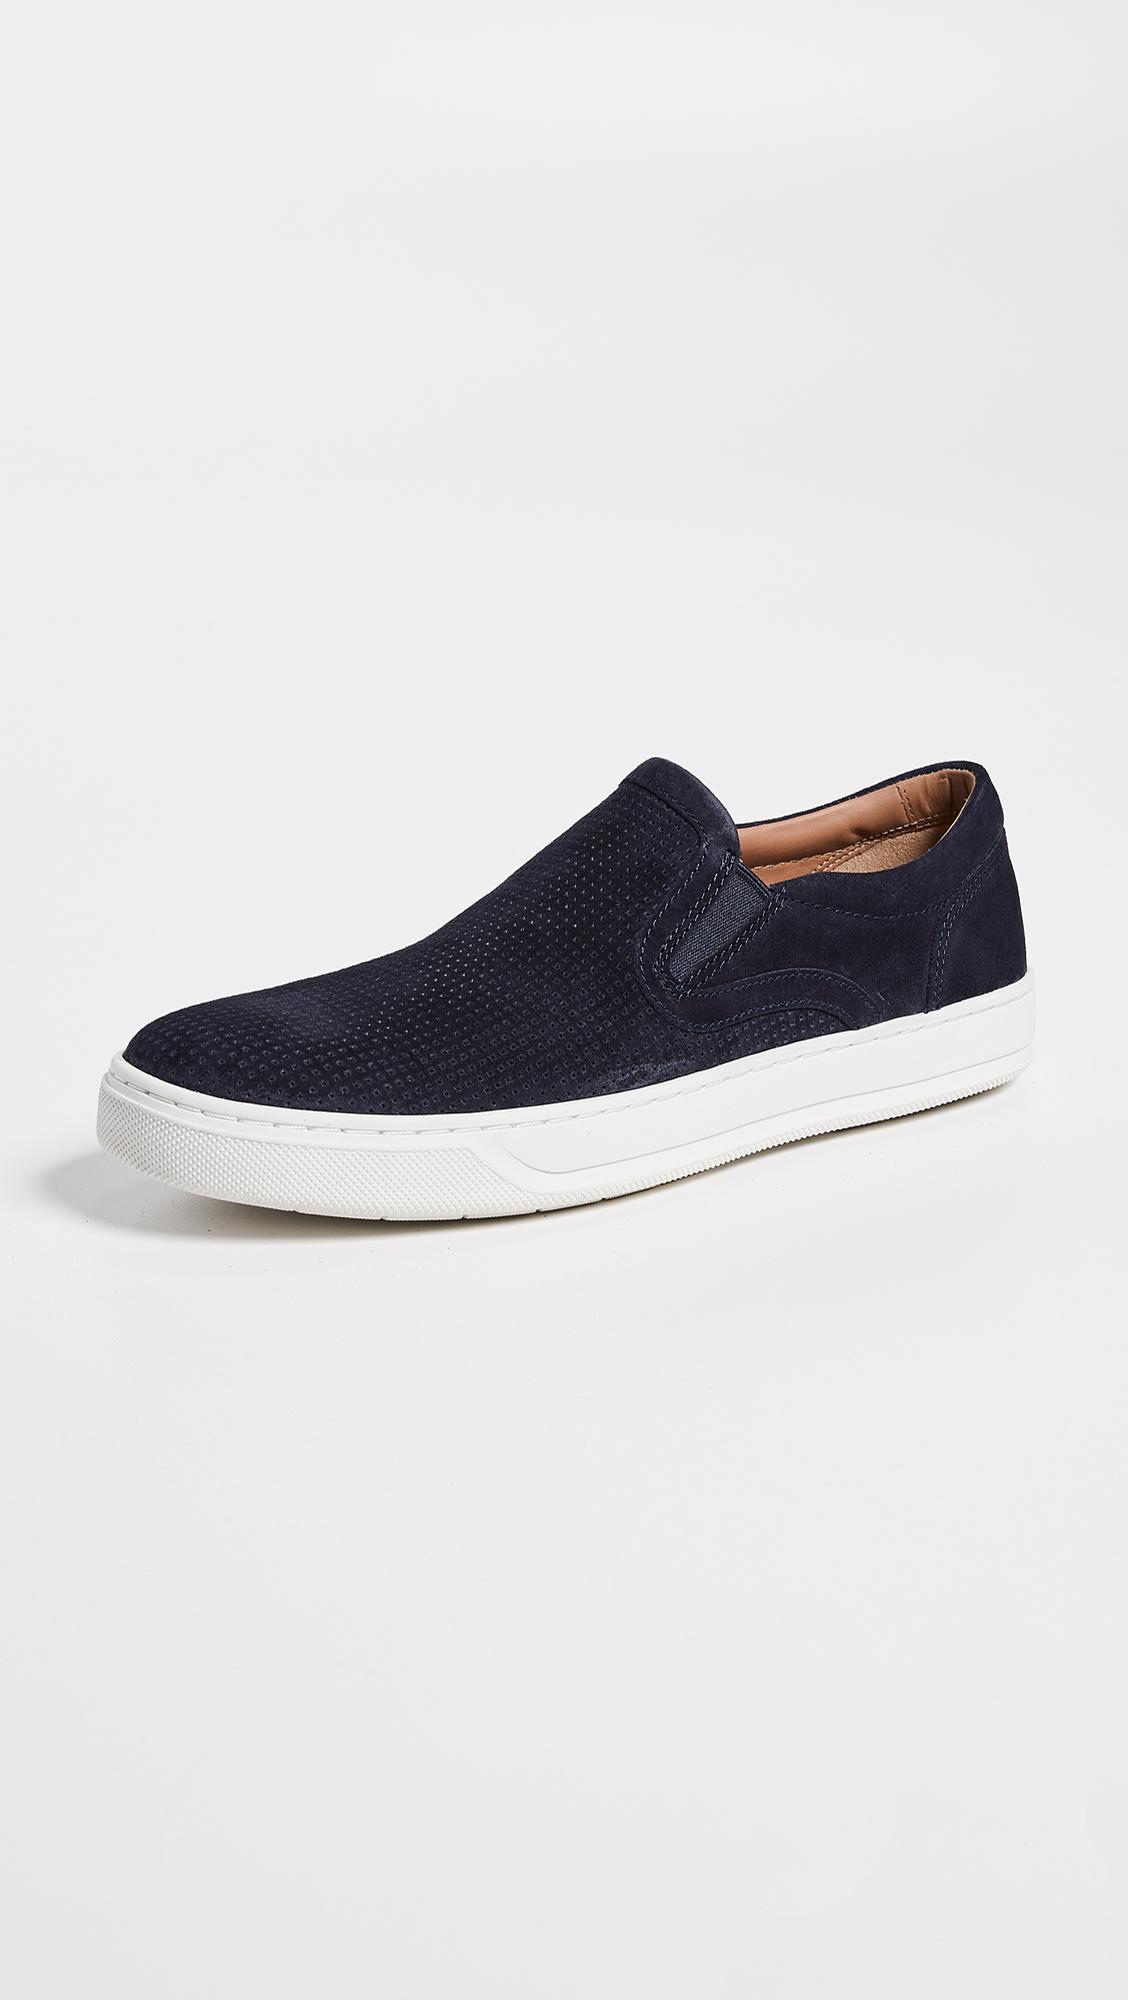 Vince Ace Perforated Suede Slip On Sneakers in Blue for Men - Lyst